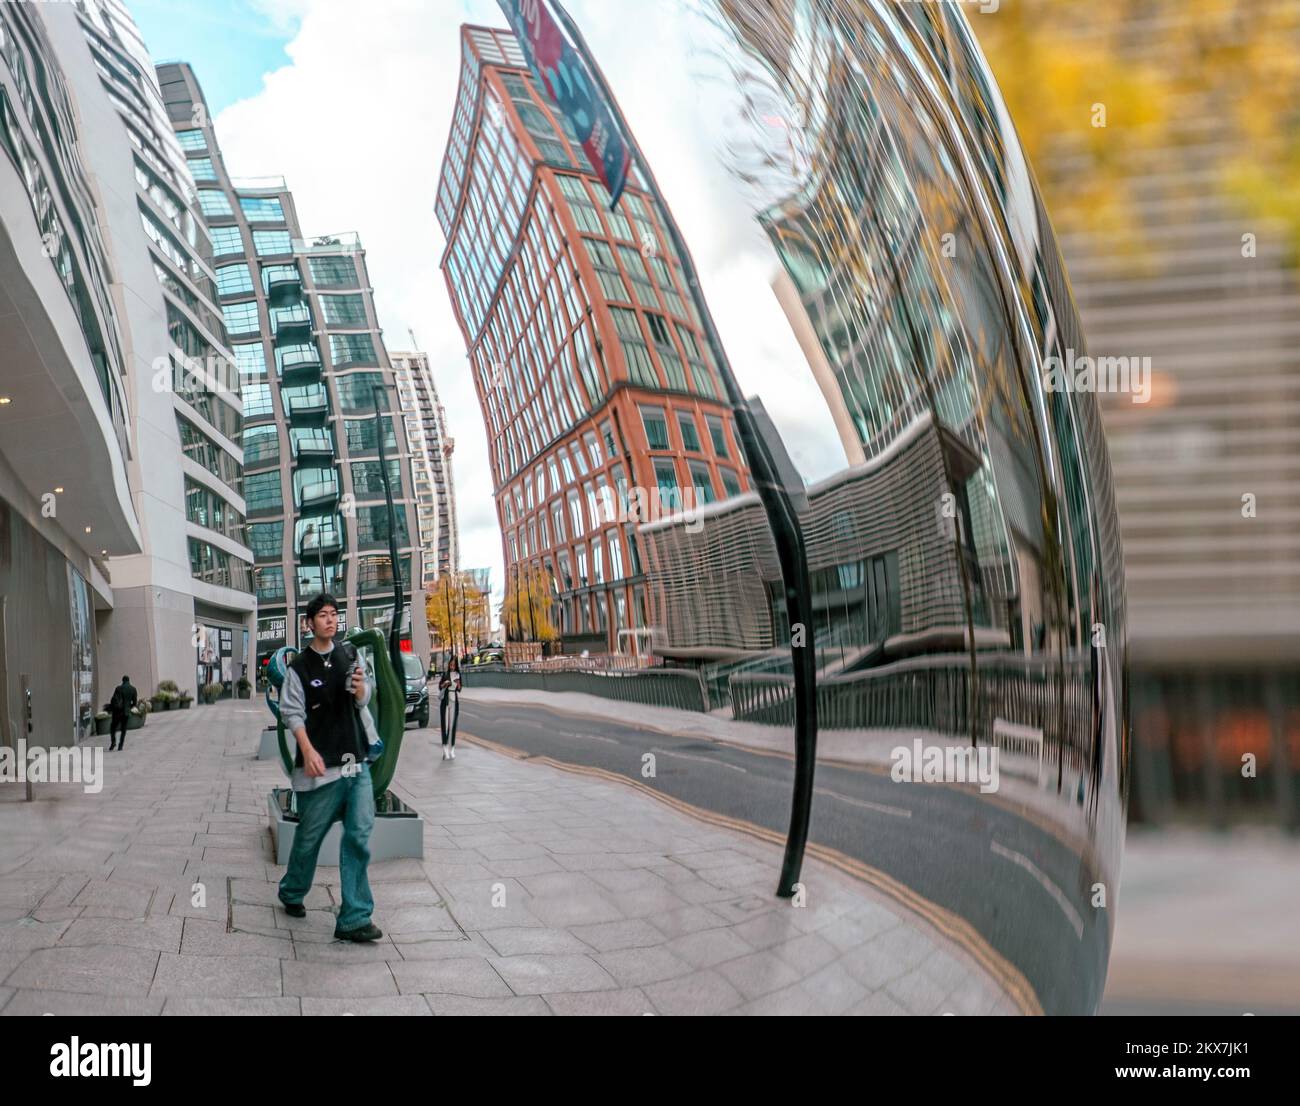 Distorted reflection from art work The Knot, of young man walking and curved sky-scrapers in background on Water Street, Canary Wharf, East London. Stock Photo